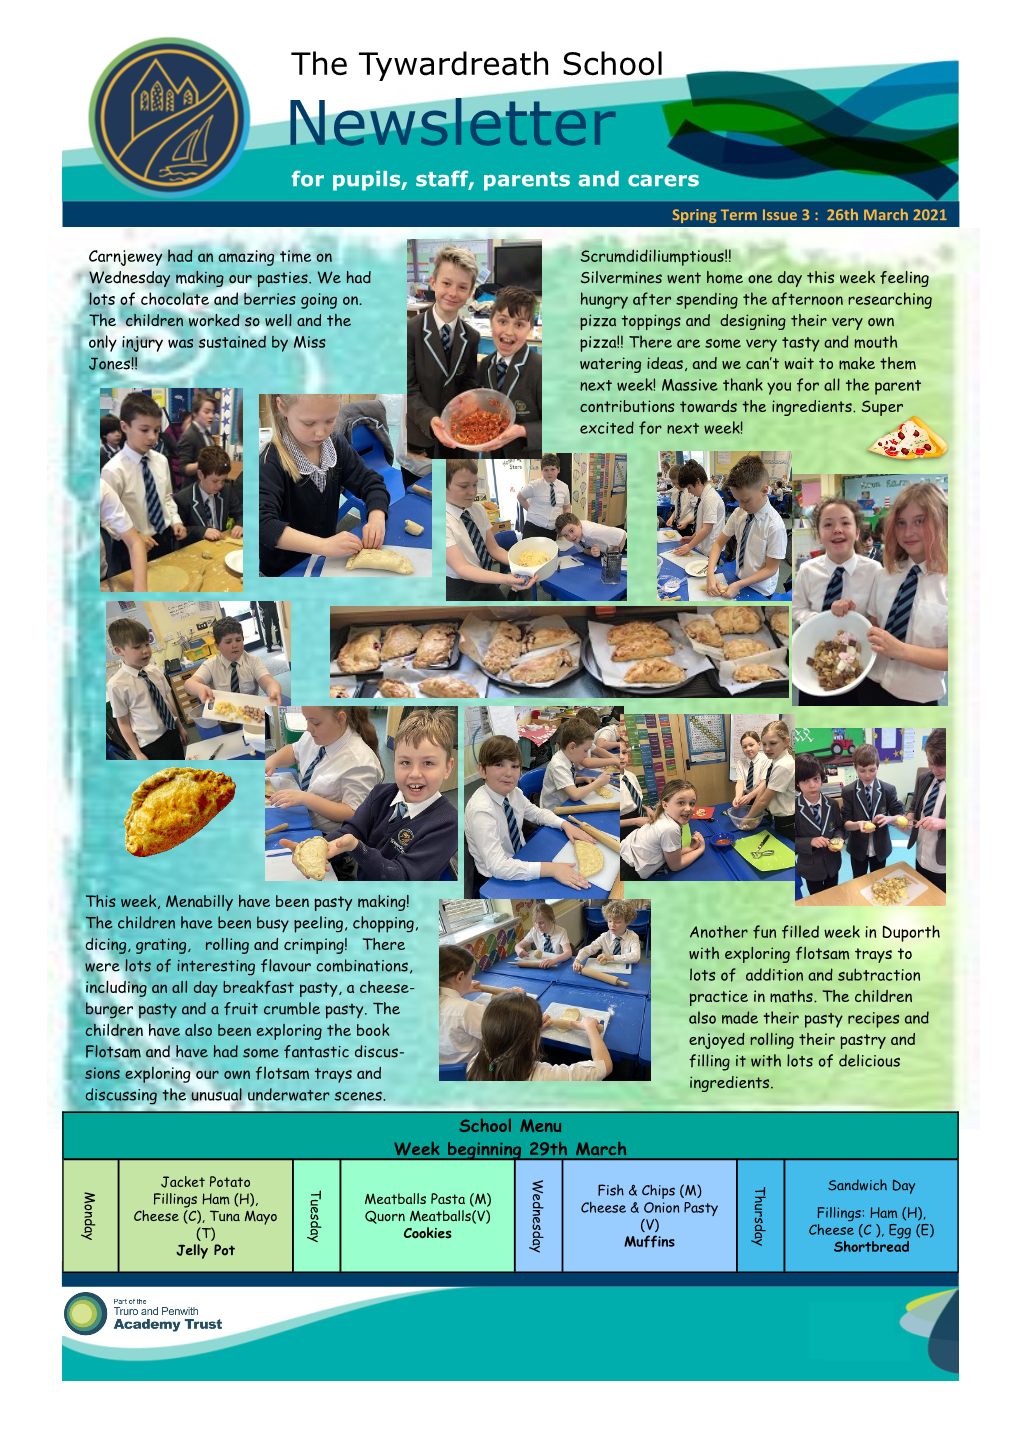 Newsletter for Pupils, Staff, Parents and Carers Spring Term Issue 3 : 26Th March 2021